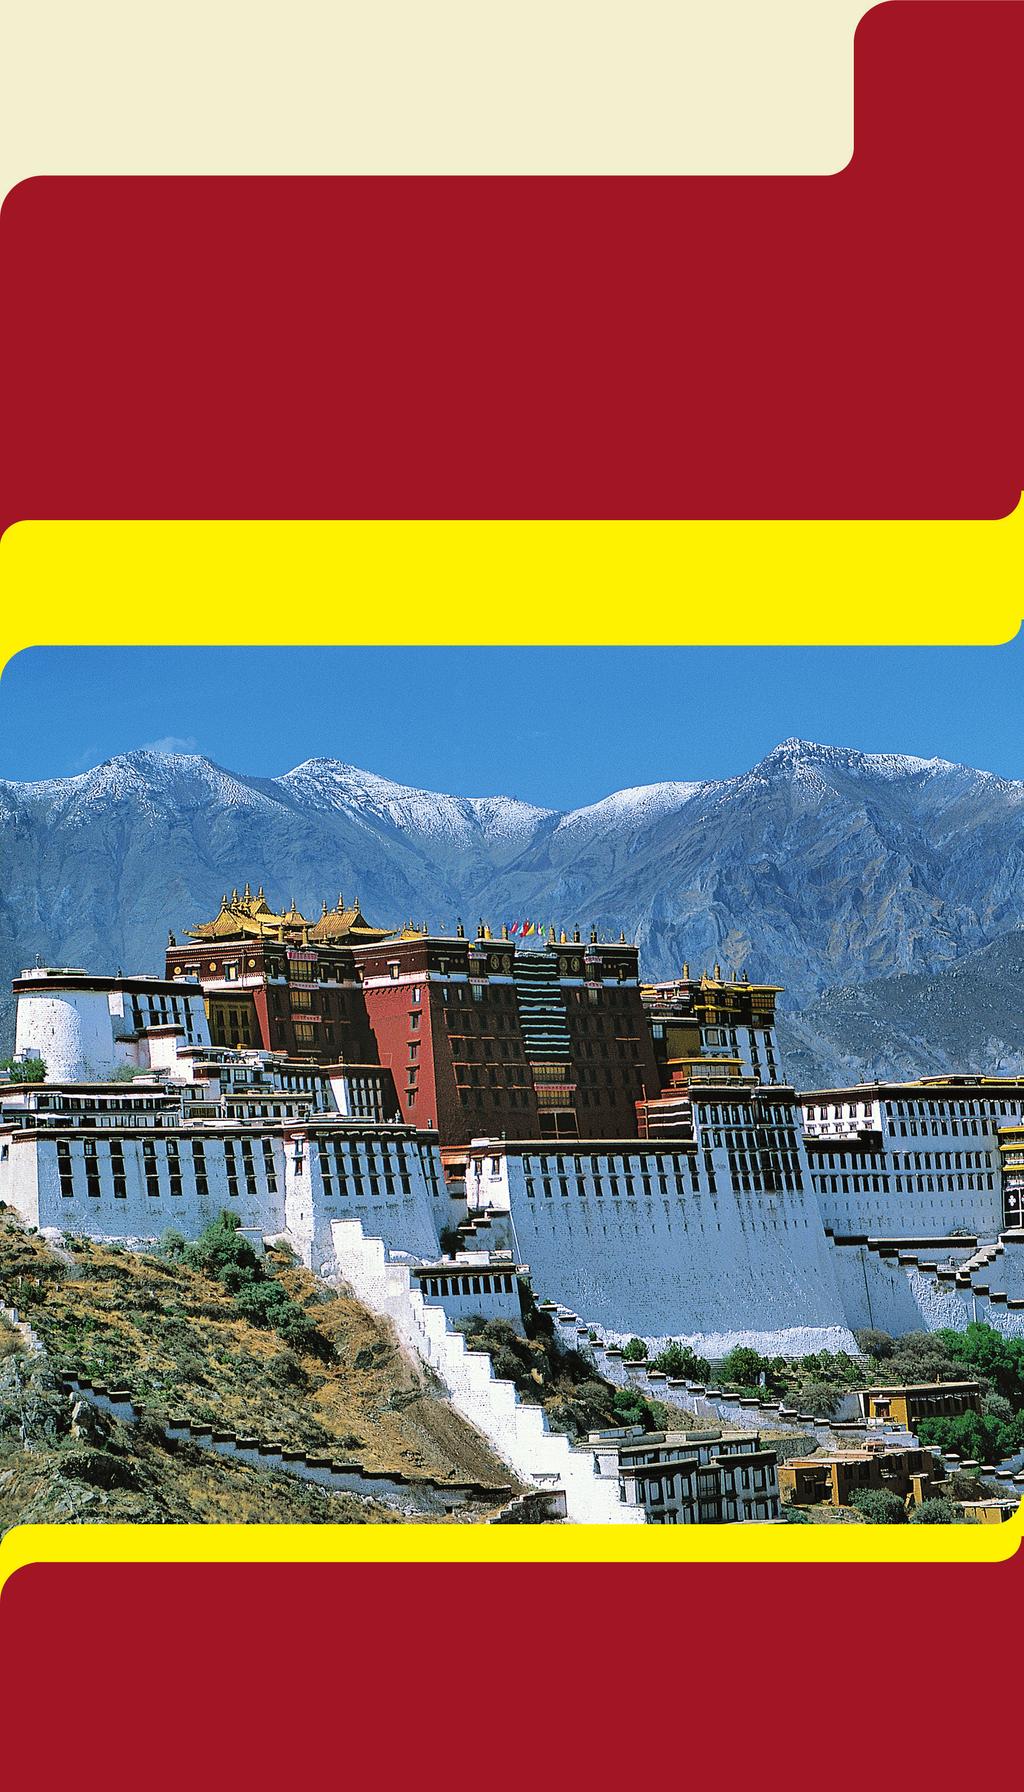 The Association of Former Students of Texas A&M University presents CHINA, TIBET & THE YANGTZE RIVER